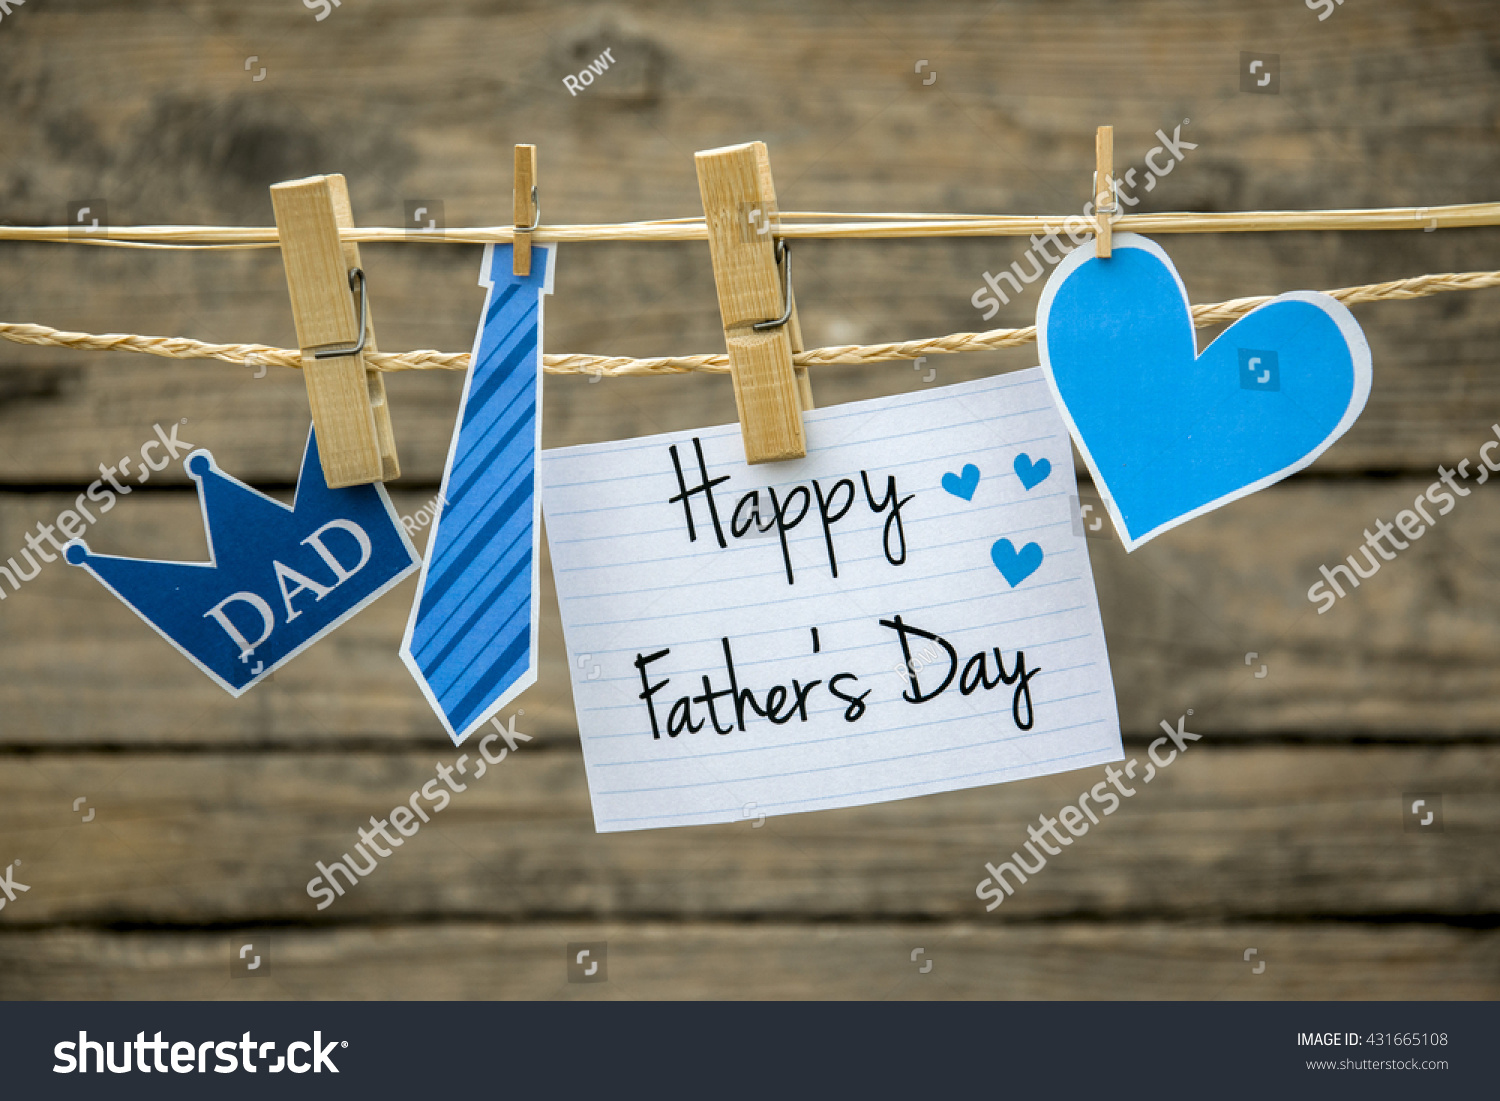 Fathers day greeting card or background #431665108